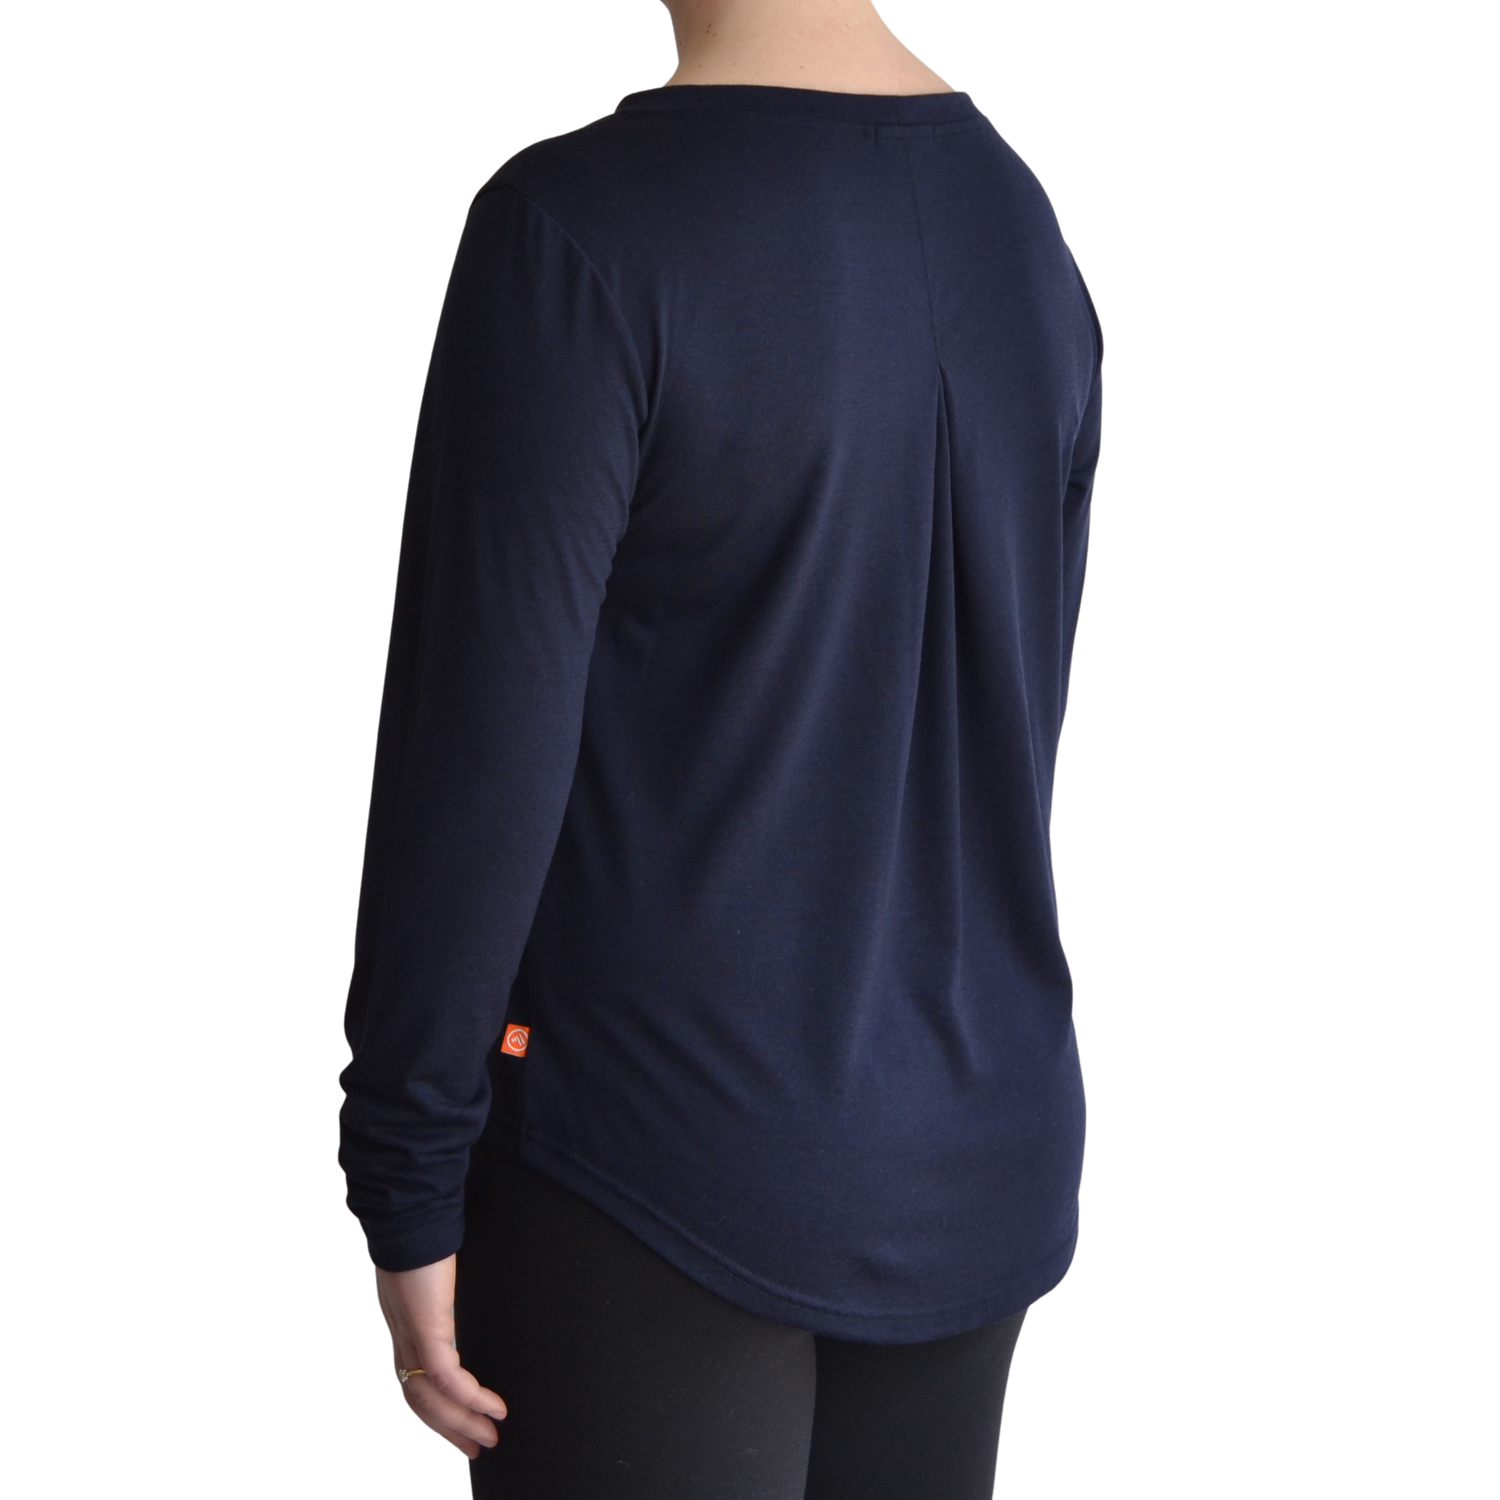 Links long sleeve merino top in navy blue colour. The model is standing on a 45 degree angle facing the back showing a dropped back hemline and box pleat. 